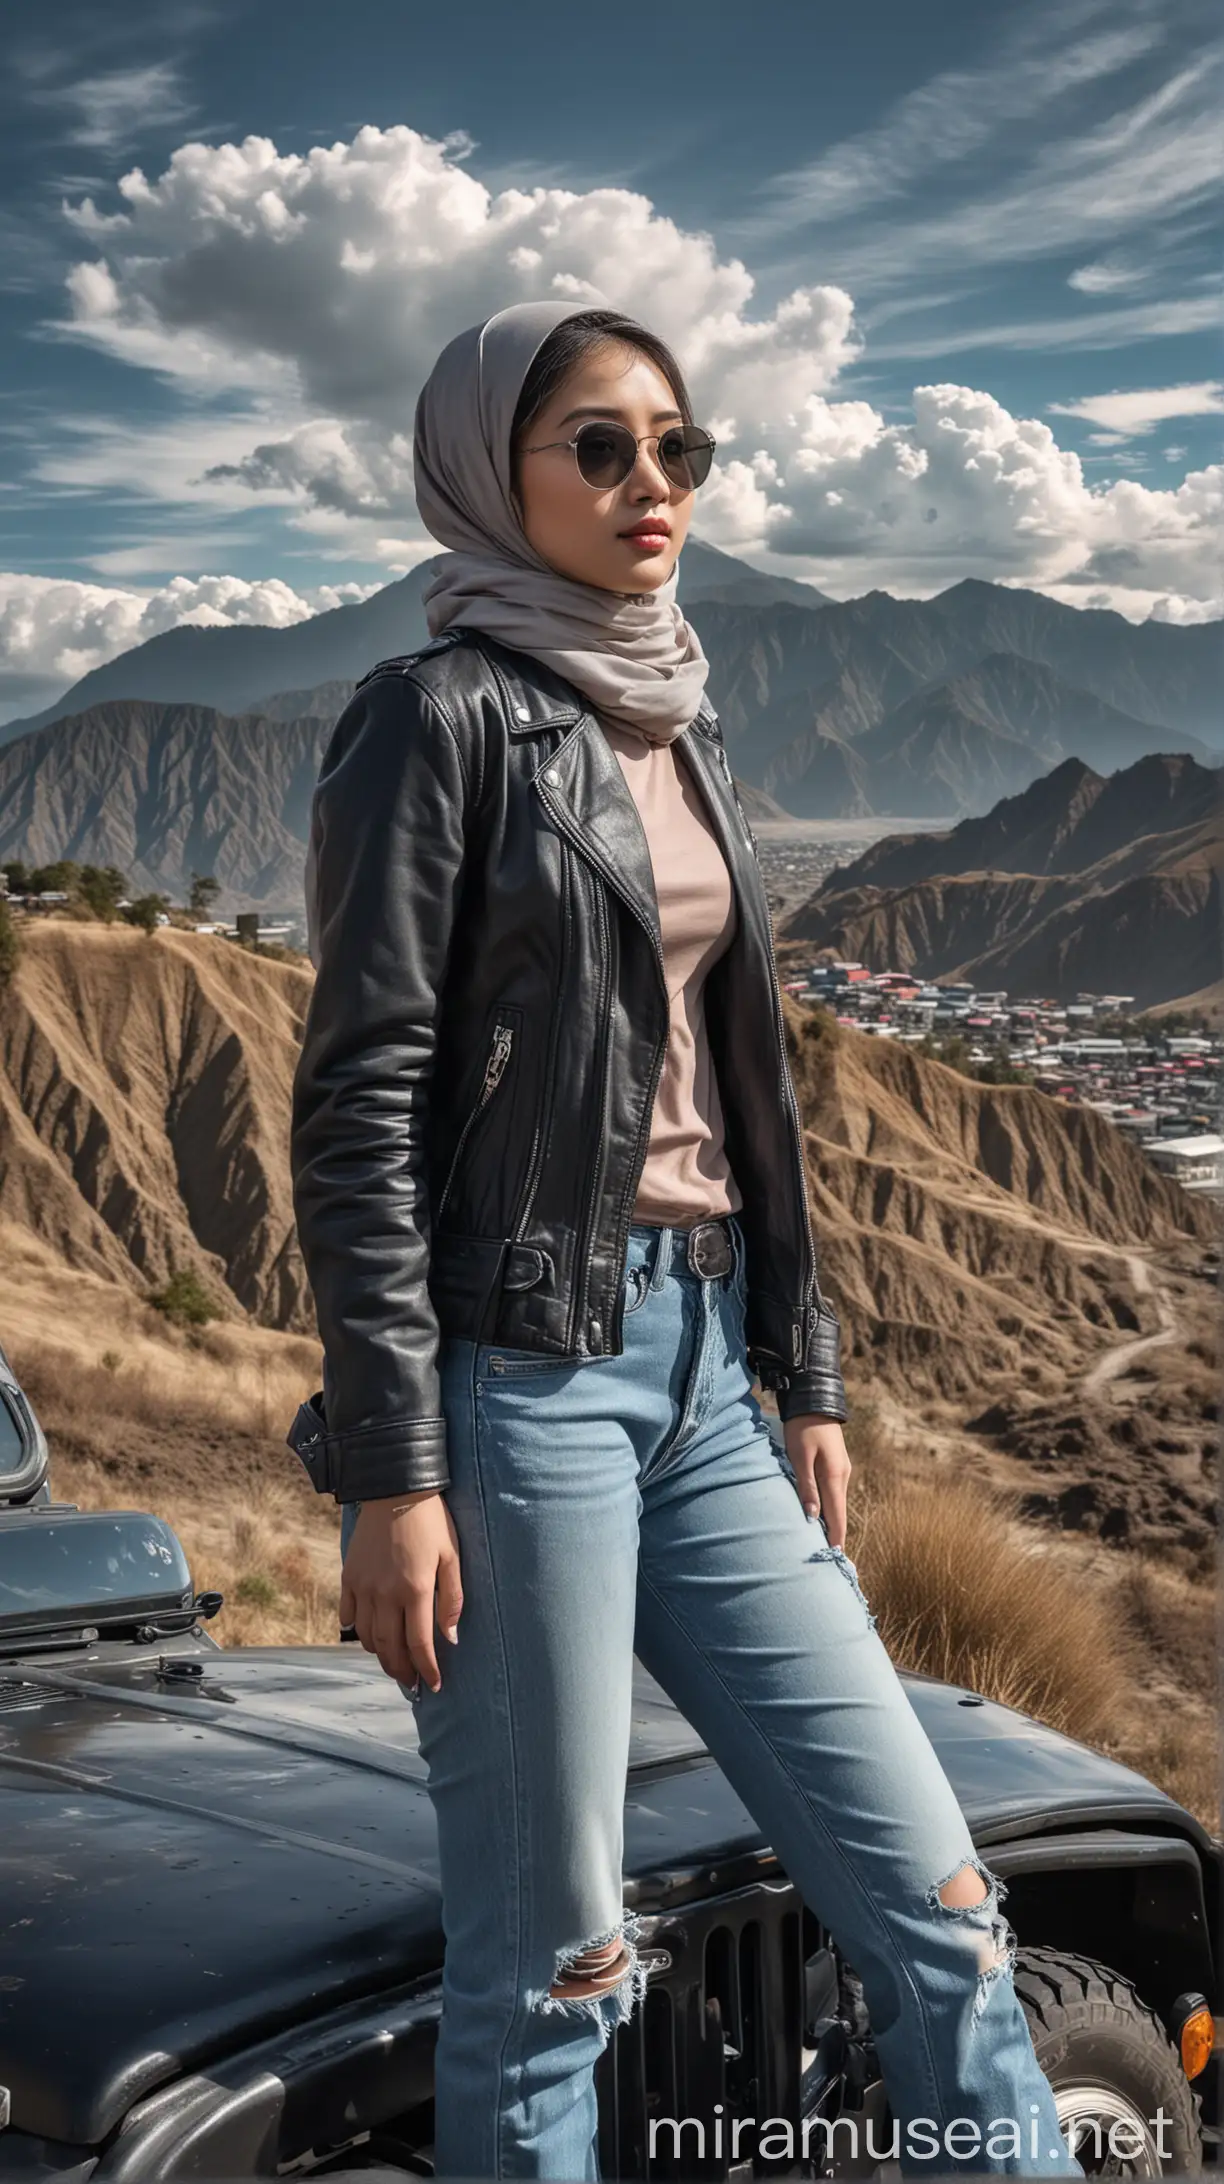 Korean Woman in Hijab with Jeep Against Bromo Mountain View